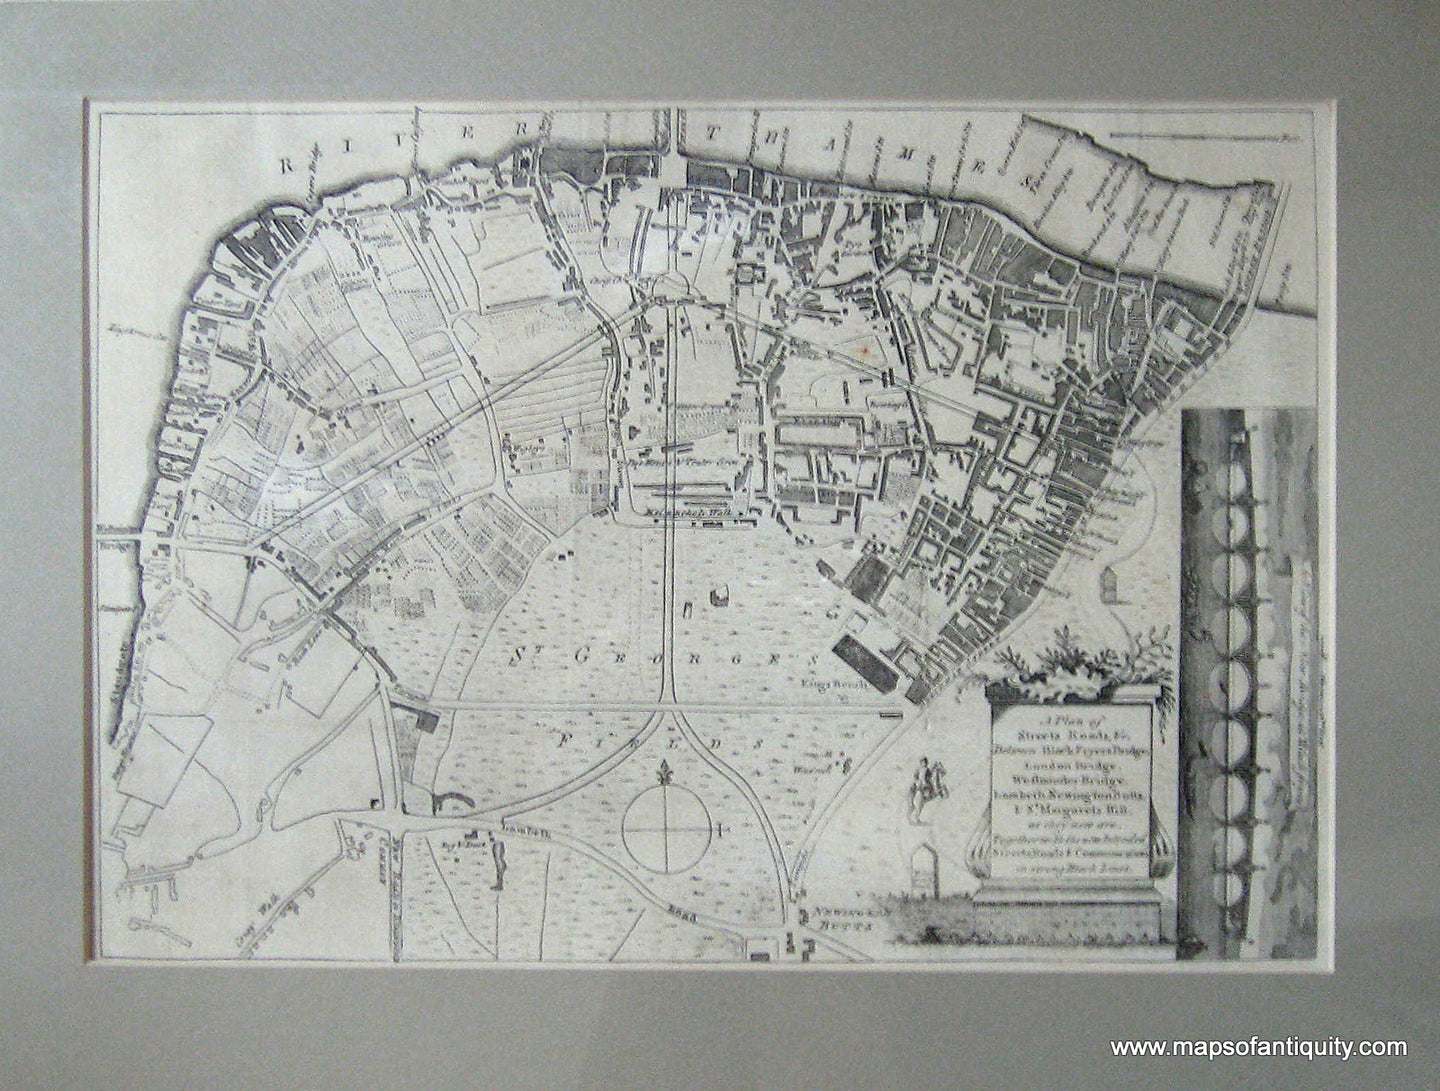 Black-and-White-Antique-Map-A-Plan-of-Streets-Roads-&c.-Between-Black-Fryers-Bridge-London-Bridge-Westminster-Bridge-Lambeth-Newington-Butts-&-St.-Margarets-Hill-as-they-are-now-Together-with-the-new-Intended-Streets-R-**********-Towns-and-Cities-England-1768-London-Magazine-Maps-Of-Antiquity